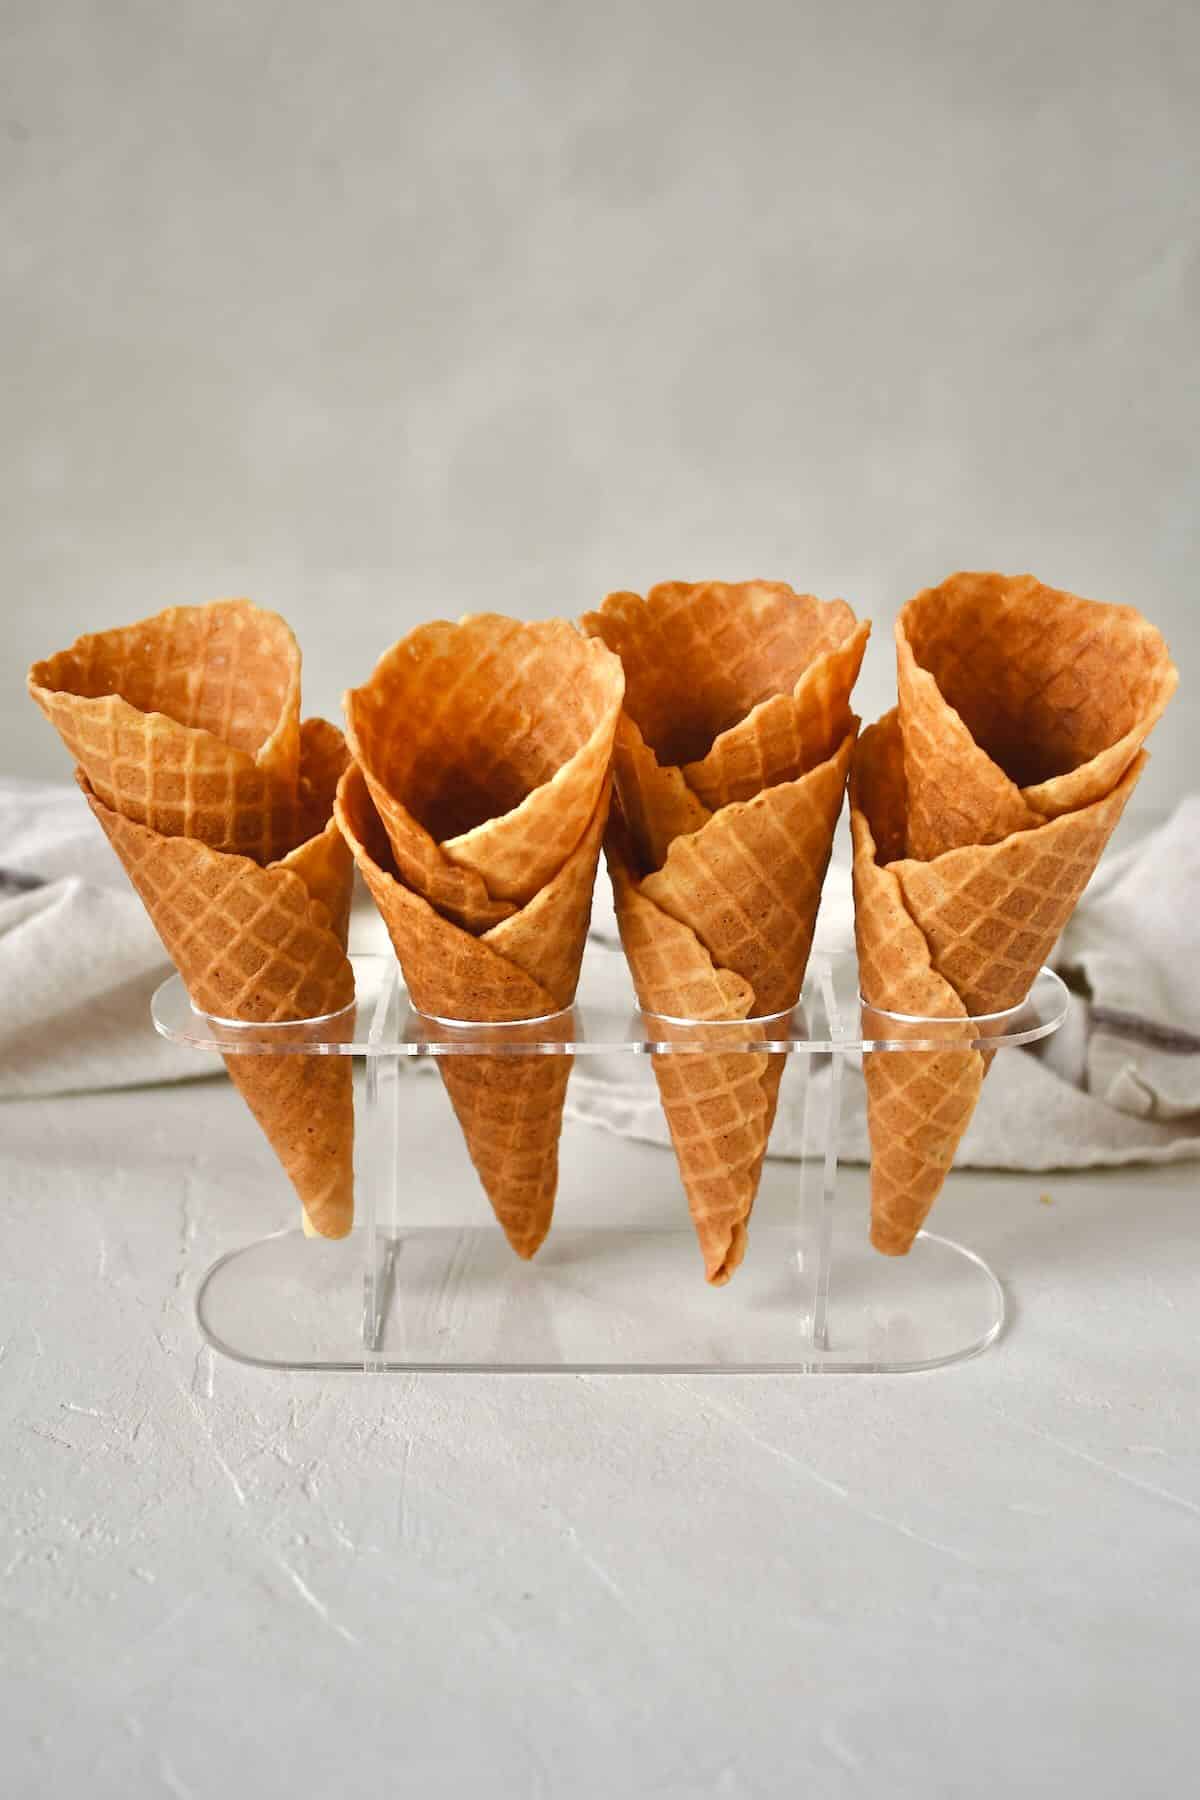 Finished Waffle Cone Recipe resting in a stand and ready to be filled with ice cream.